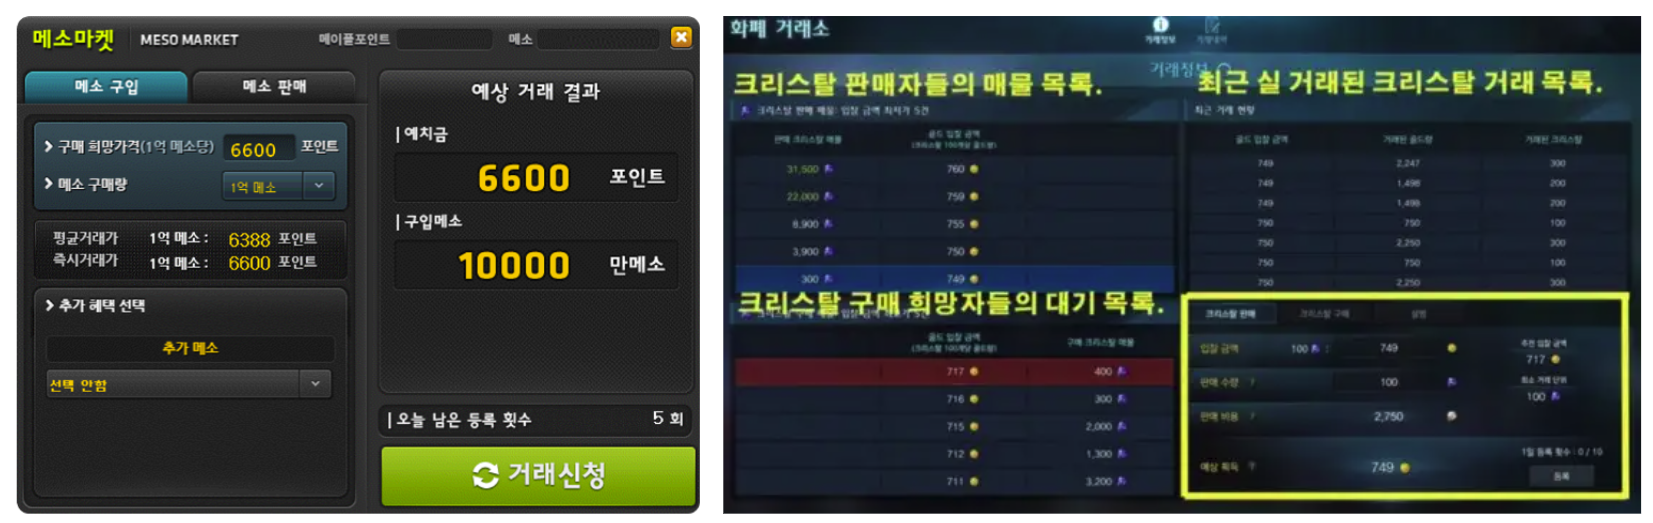 Both MapleStory and Lost Ark, a large-scale Korean MMORPG (multi-user online role-playing game) service, are instituting in-game currency exchange systems; source: Maplestory Guide, Lost Ark Community